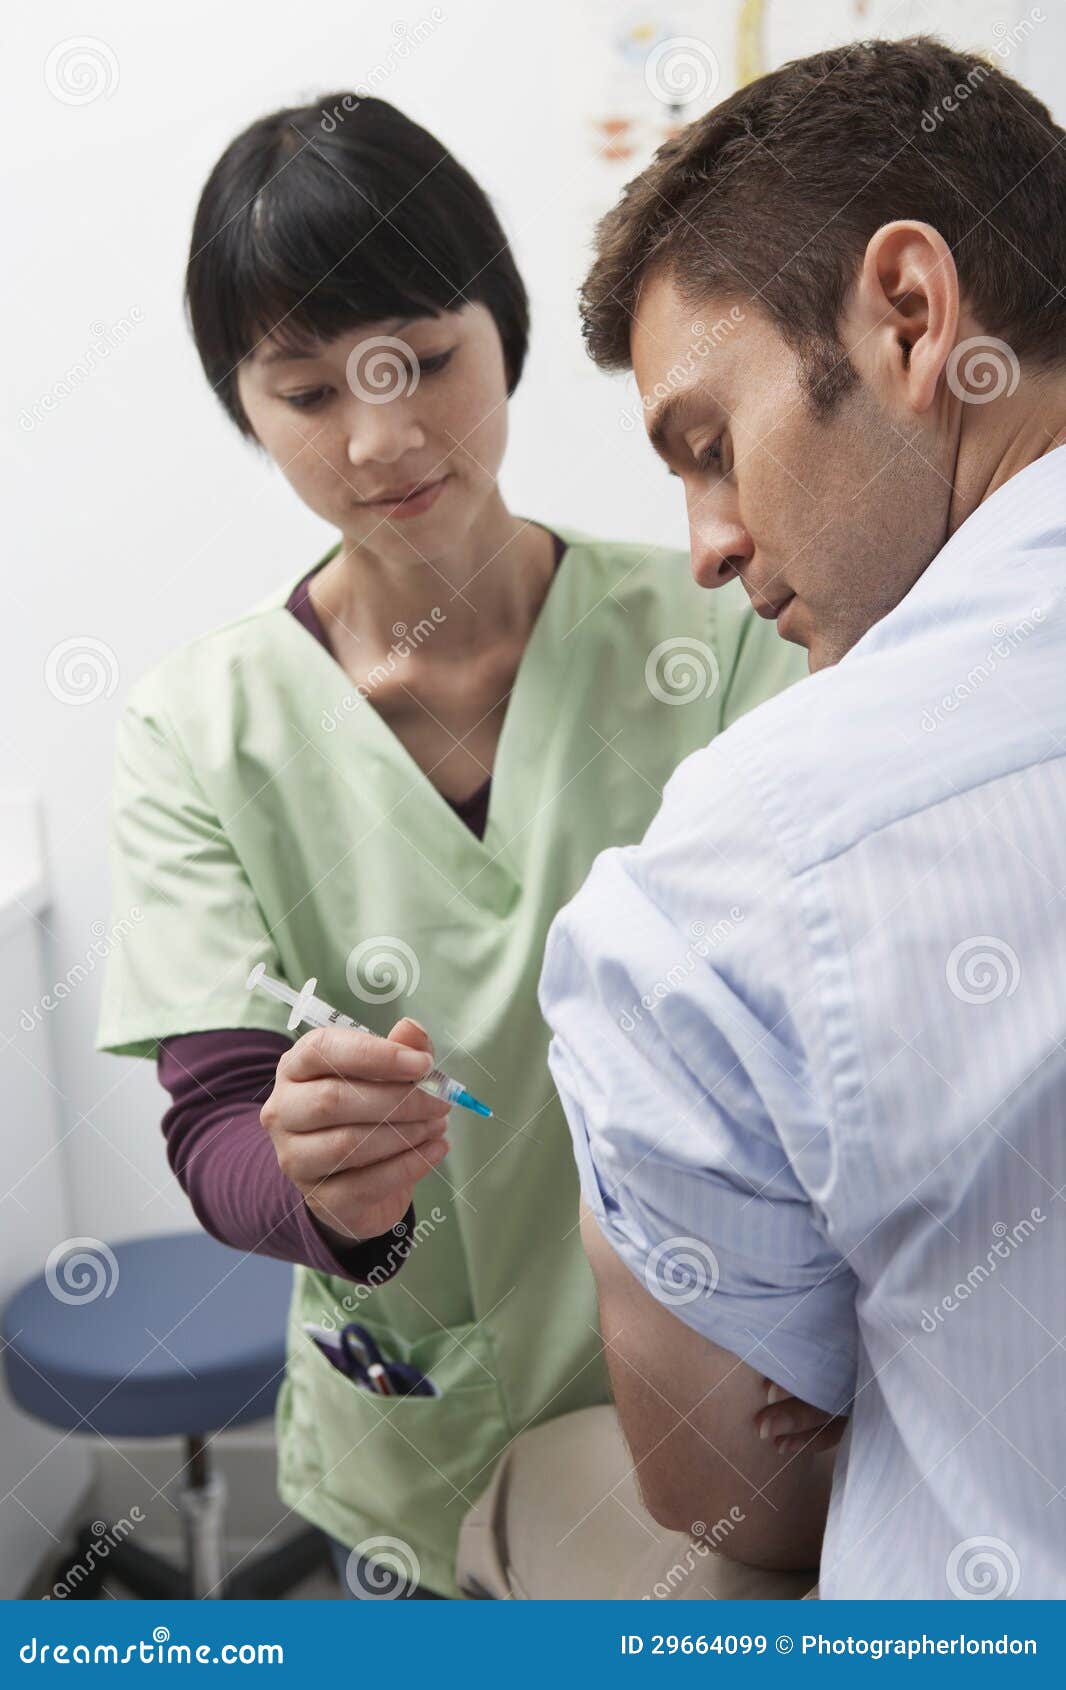 doctor injecting patient